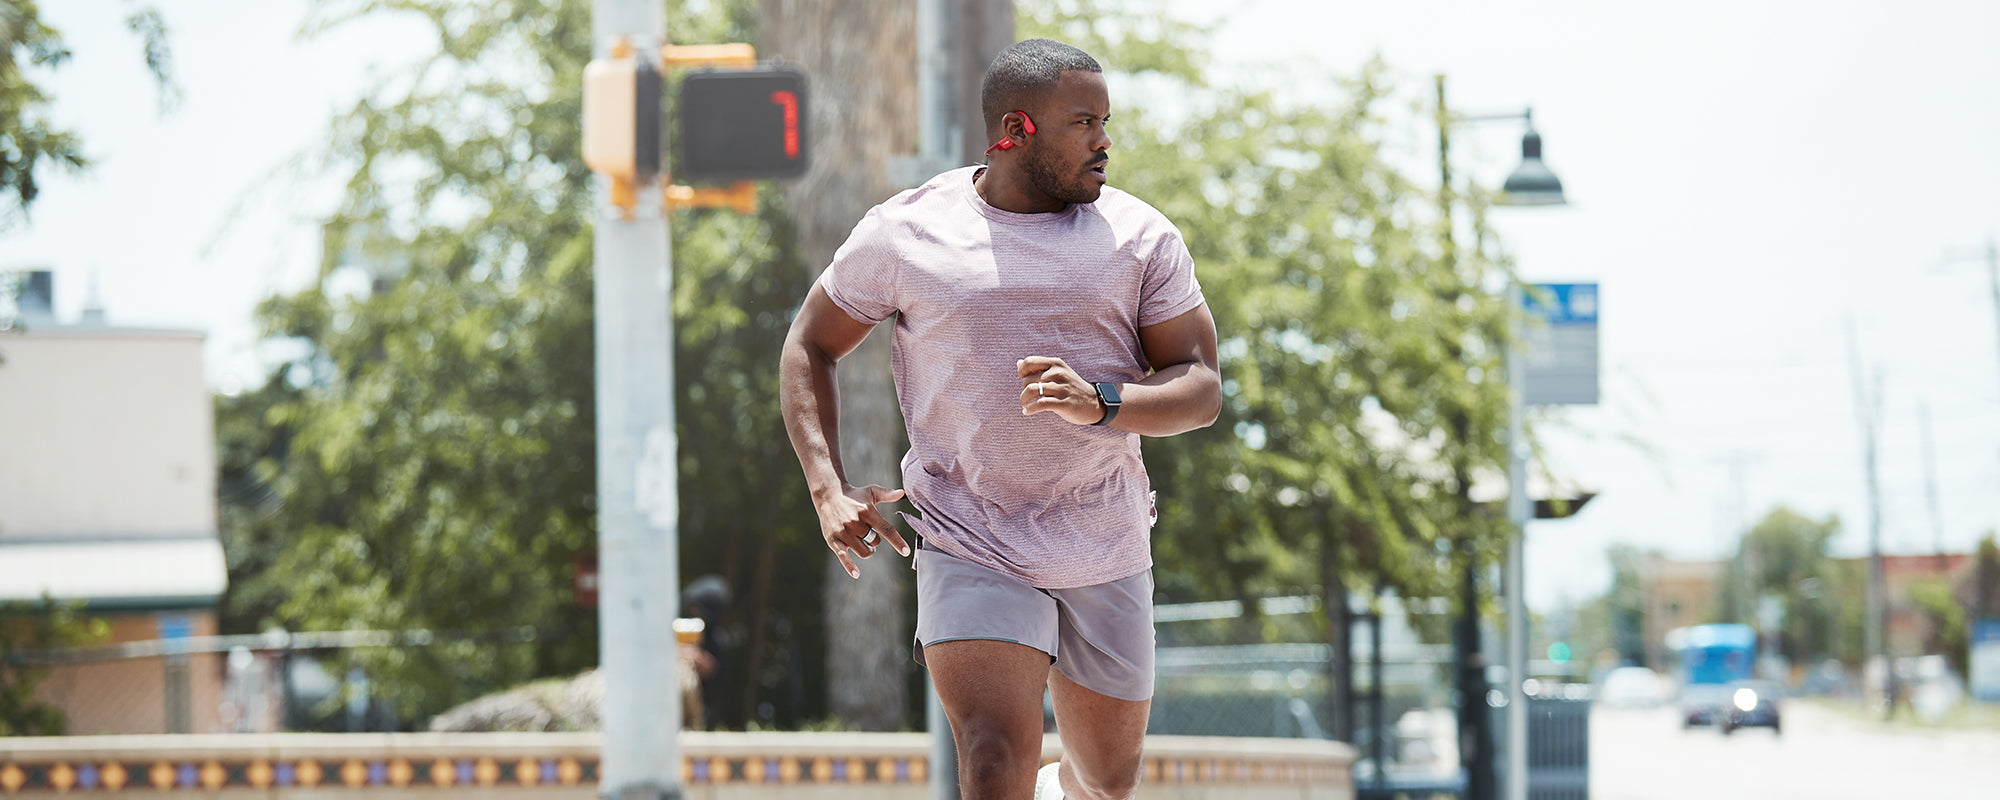 Man running in the city while wearing AfterShokz Aeropex headphones